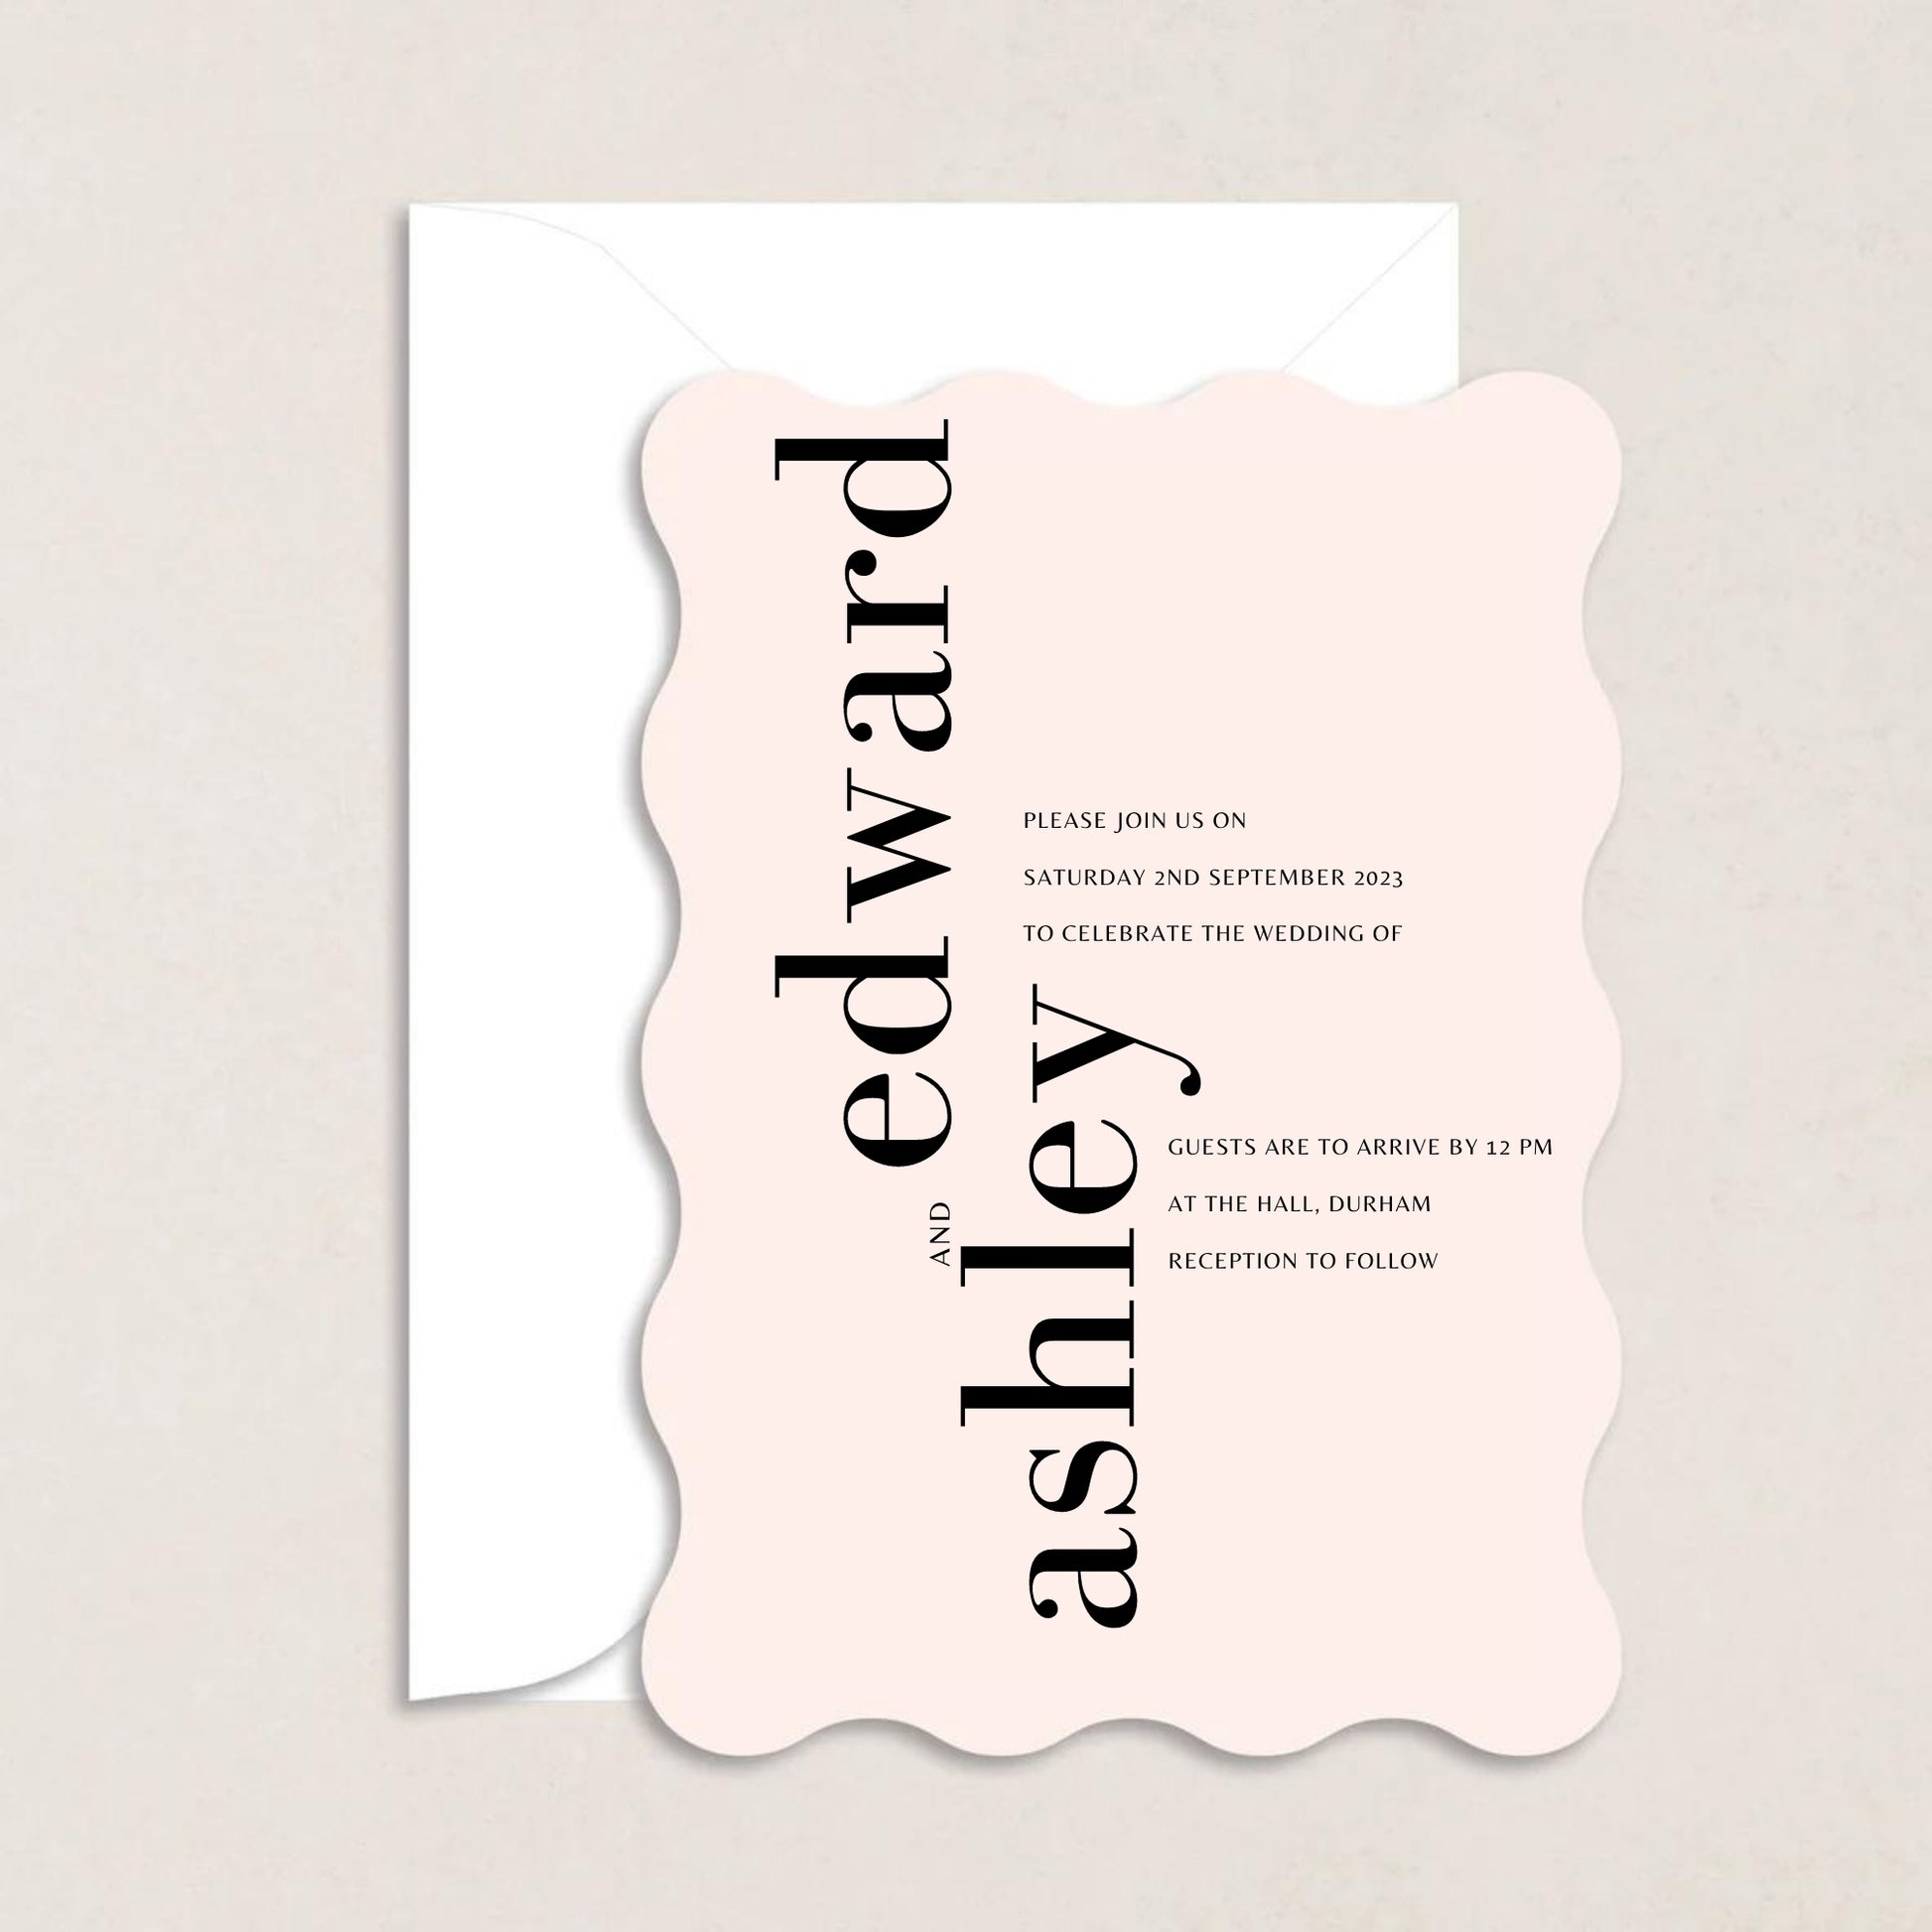 ASHLEY Wedding Invitations - Wedding Invitations available at The Ivy Collection | Luxury Wedding Stationery